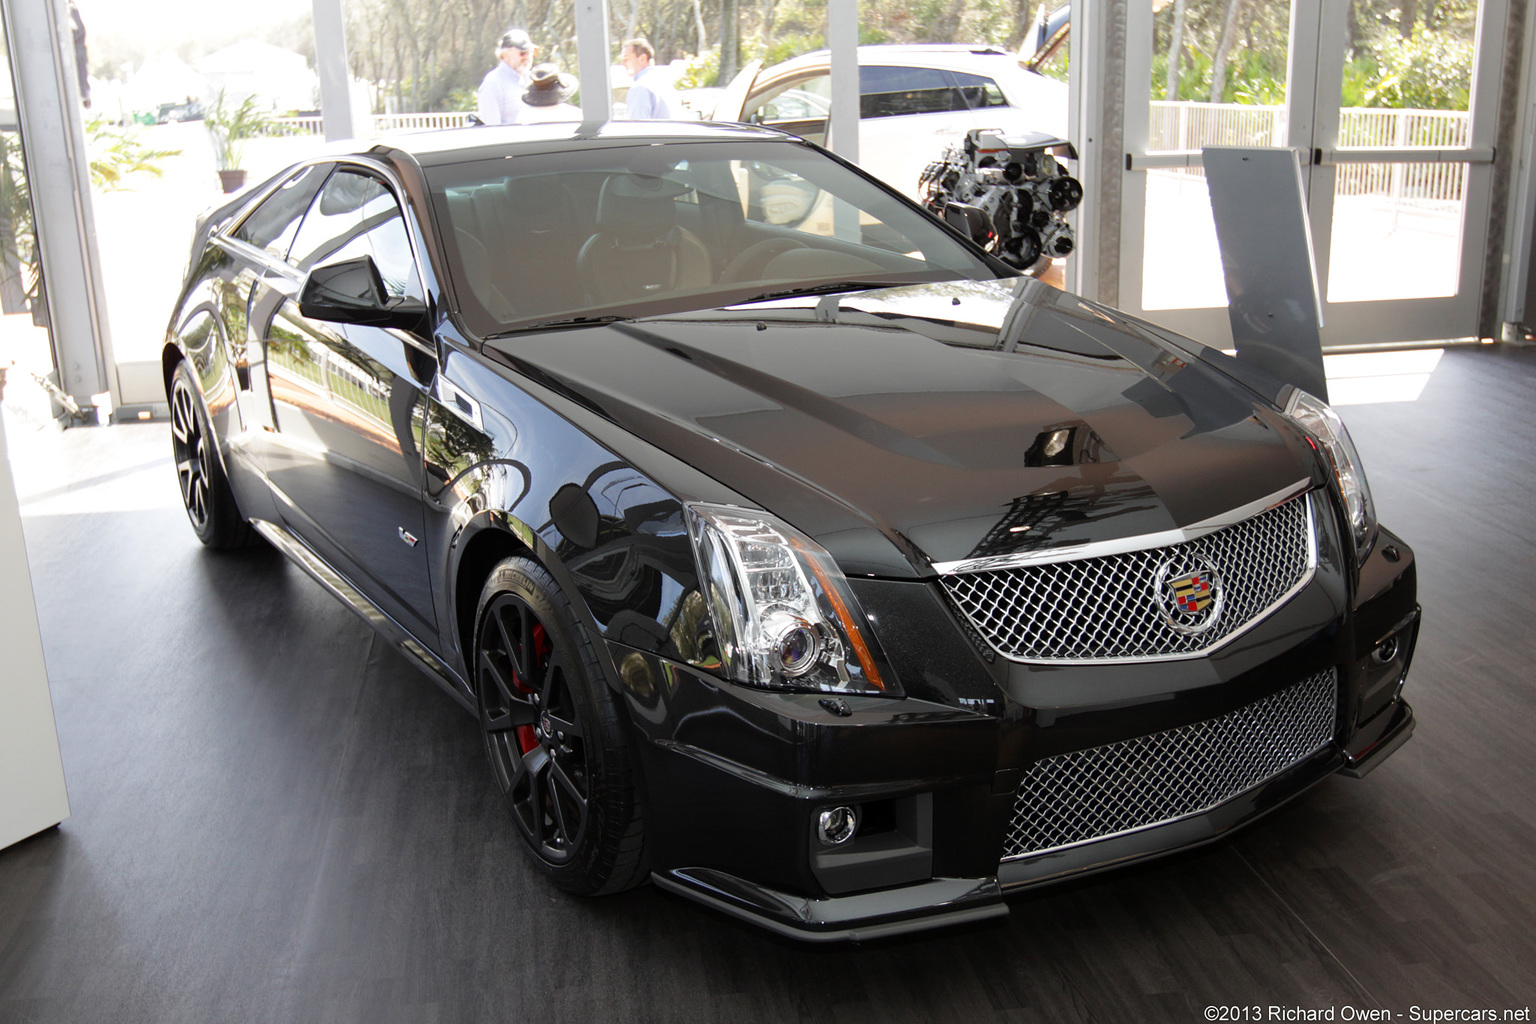 2011 Cadillac CTS-V Coupe Gallery